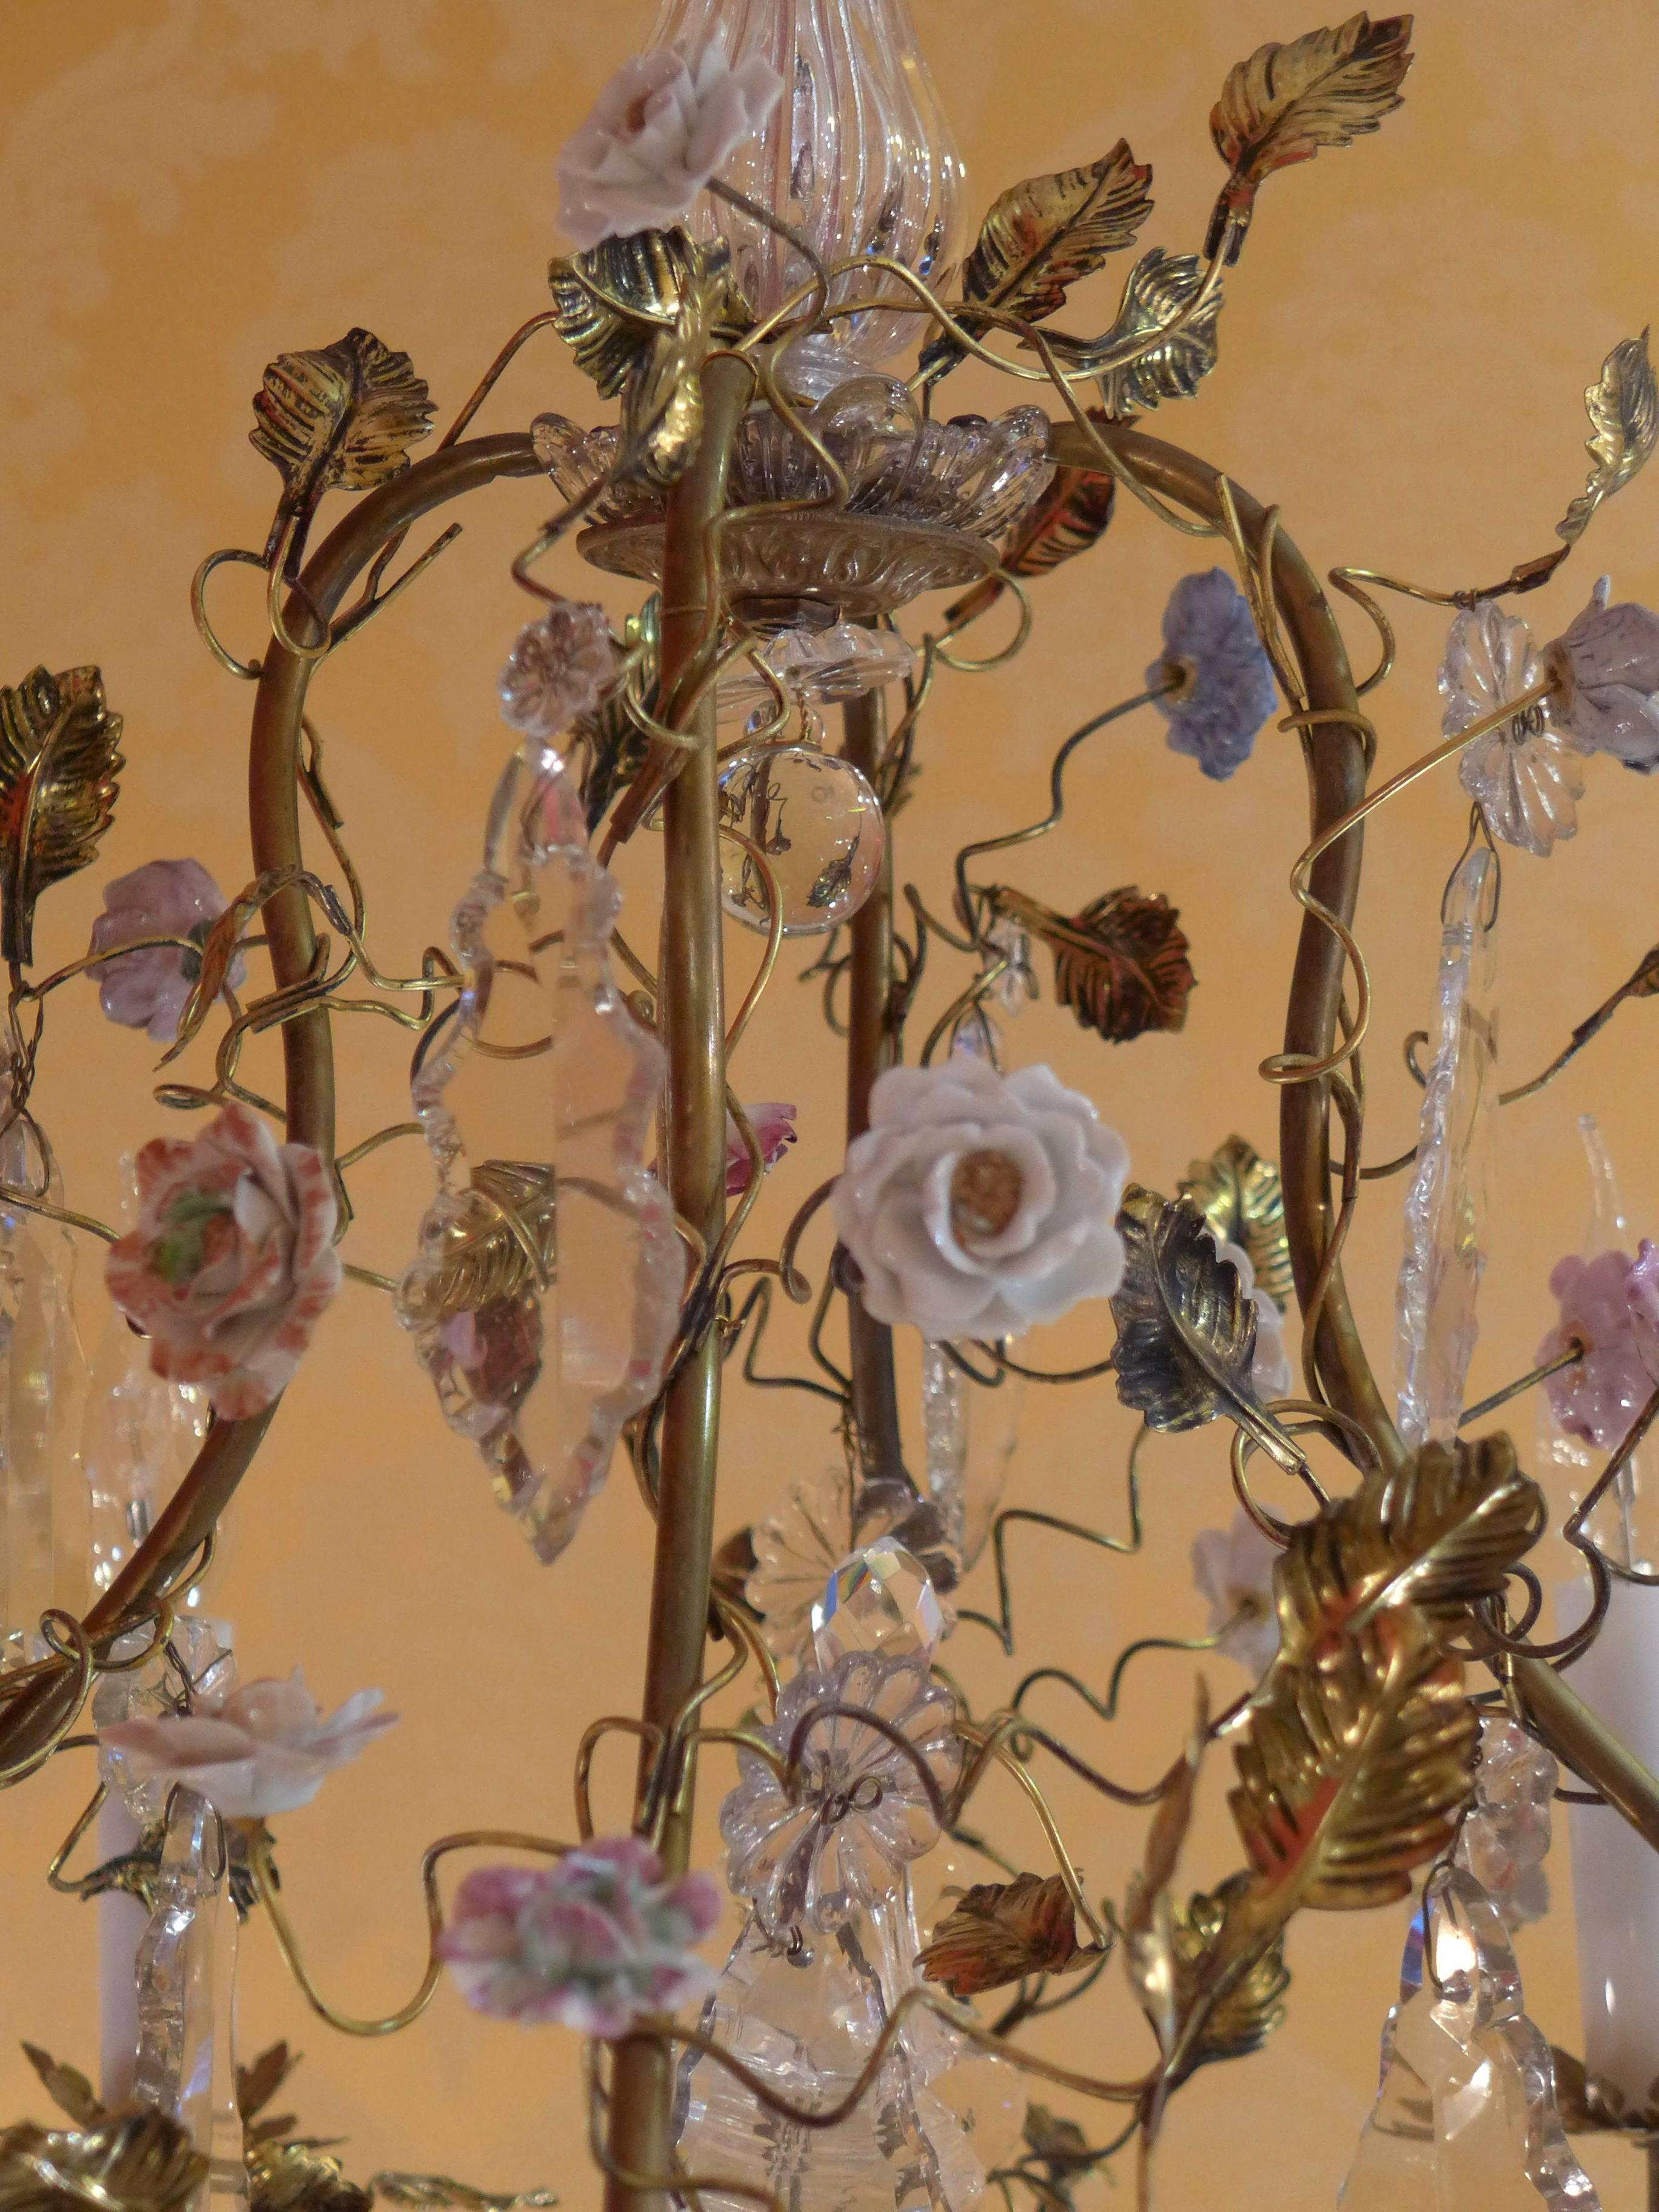 French Louis XV style, cage-form gilt bronze chandelier, with porcelain flowers and crystal, electrified with four lights. This chandelier features tree branches and foliage ended with polychromatic porcelain flowers. Cut crystal decoration of